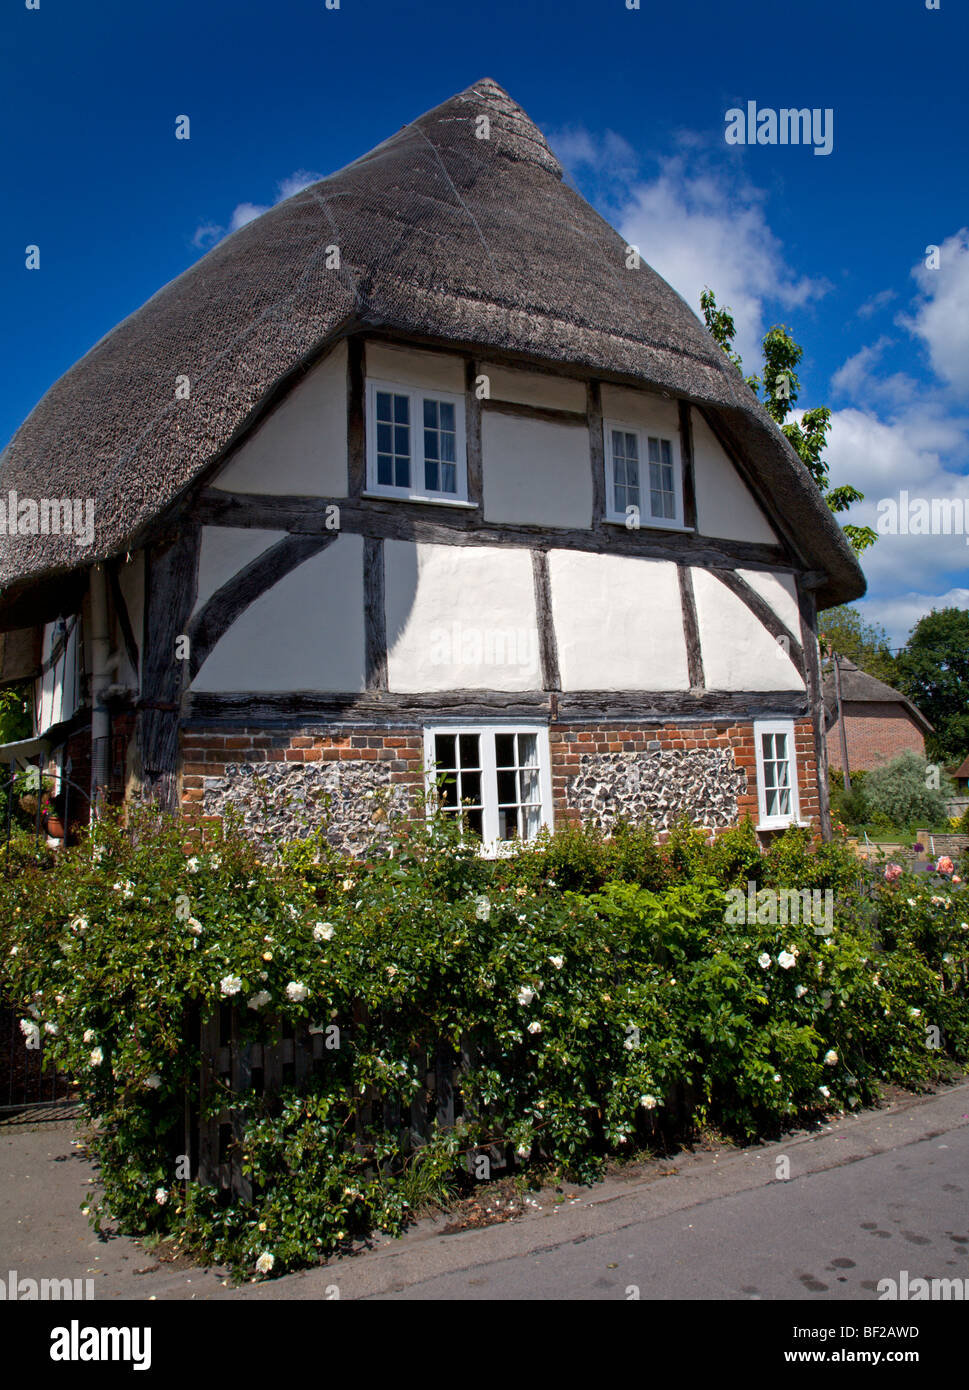 Thatched Cottage in Winterbourne, Wiltshire, England Stock Photo